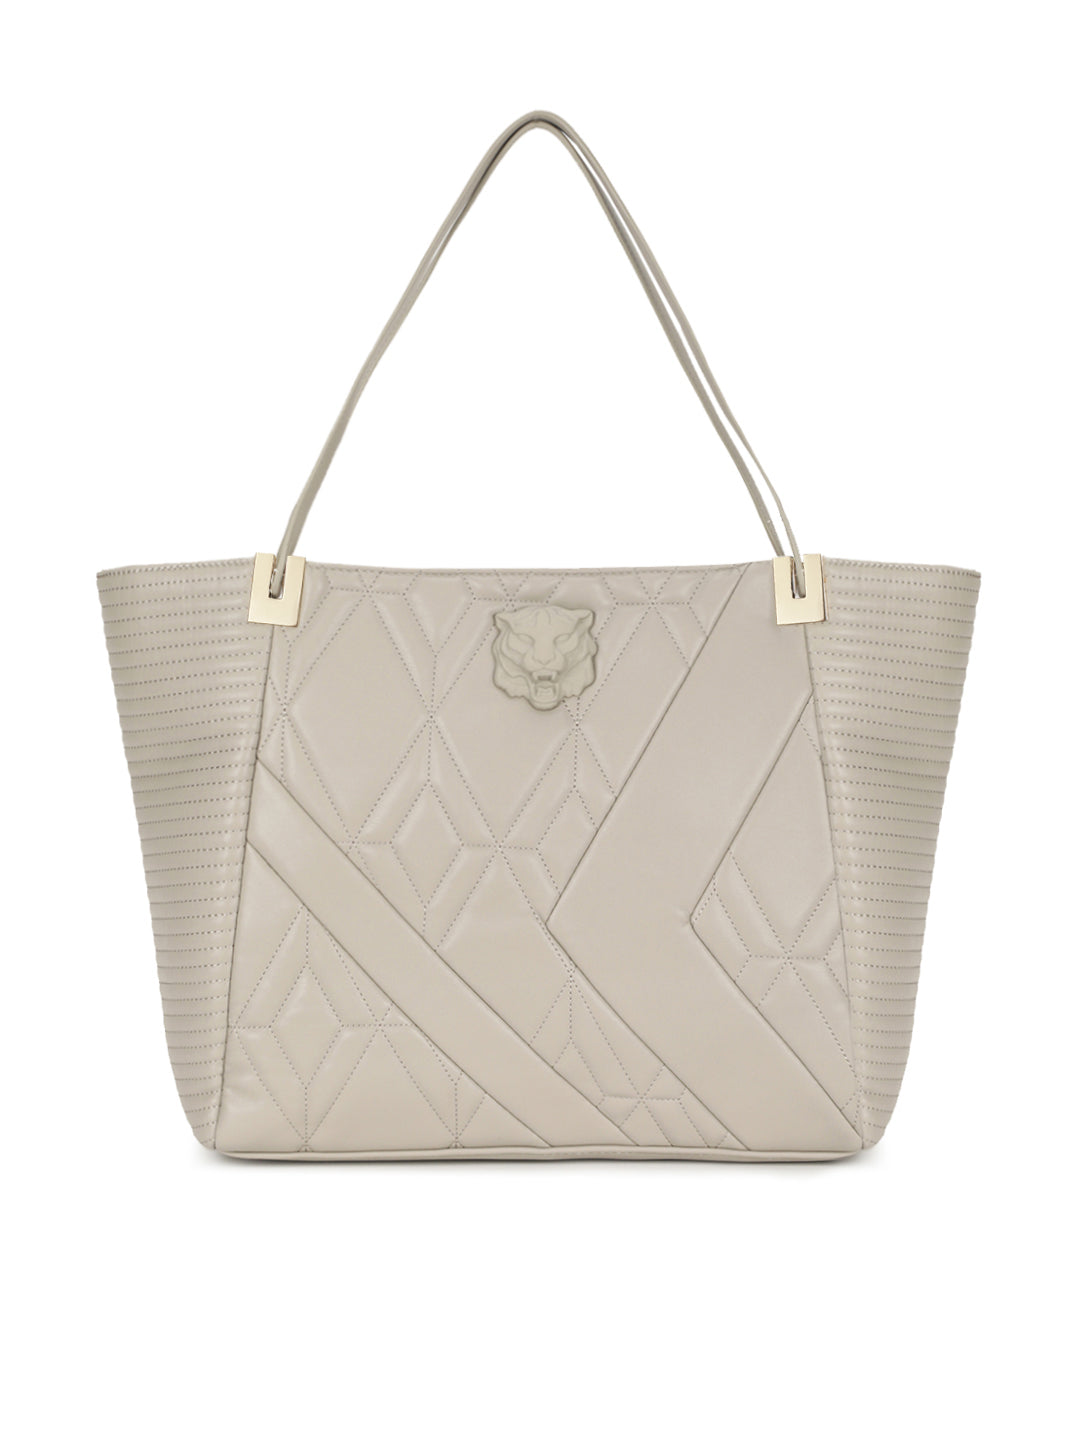 Just Cavalli Women Grey Quilted Tote Bag